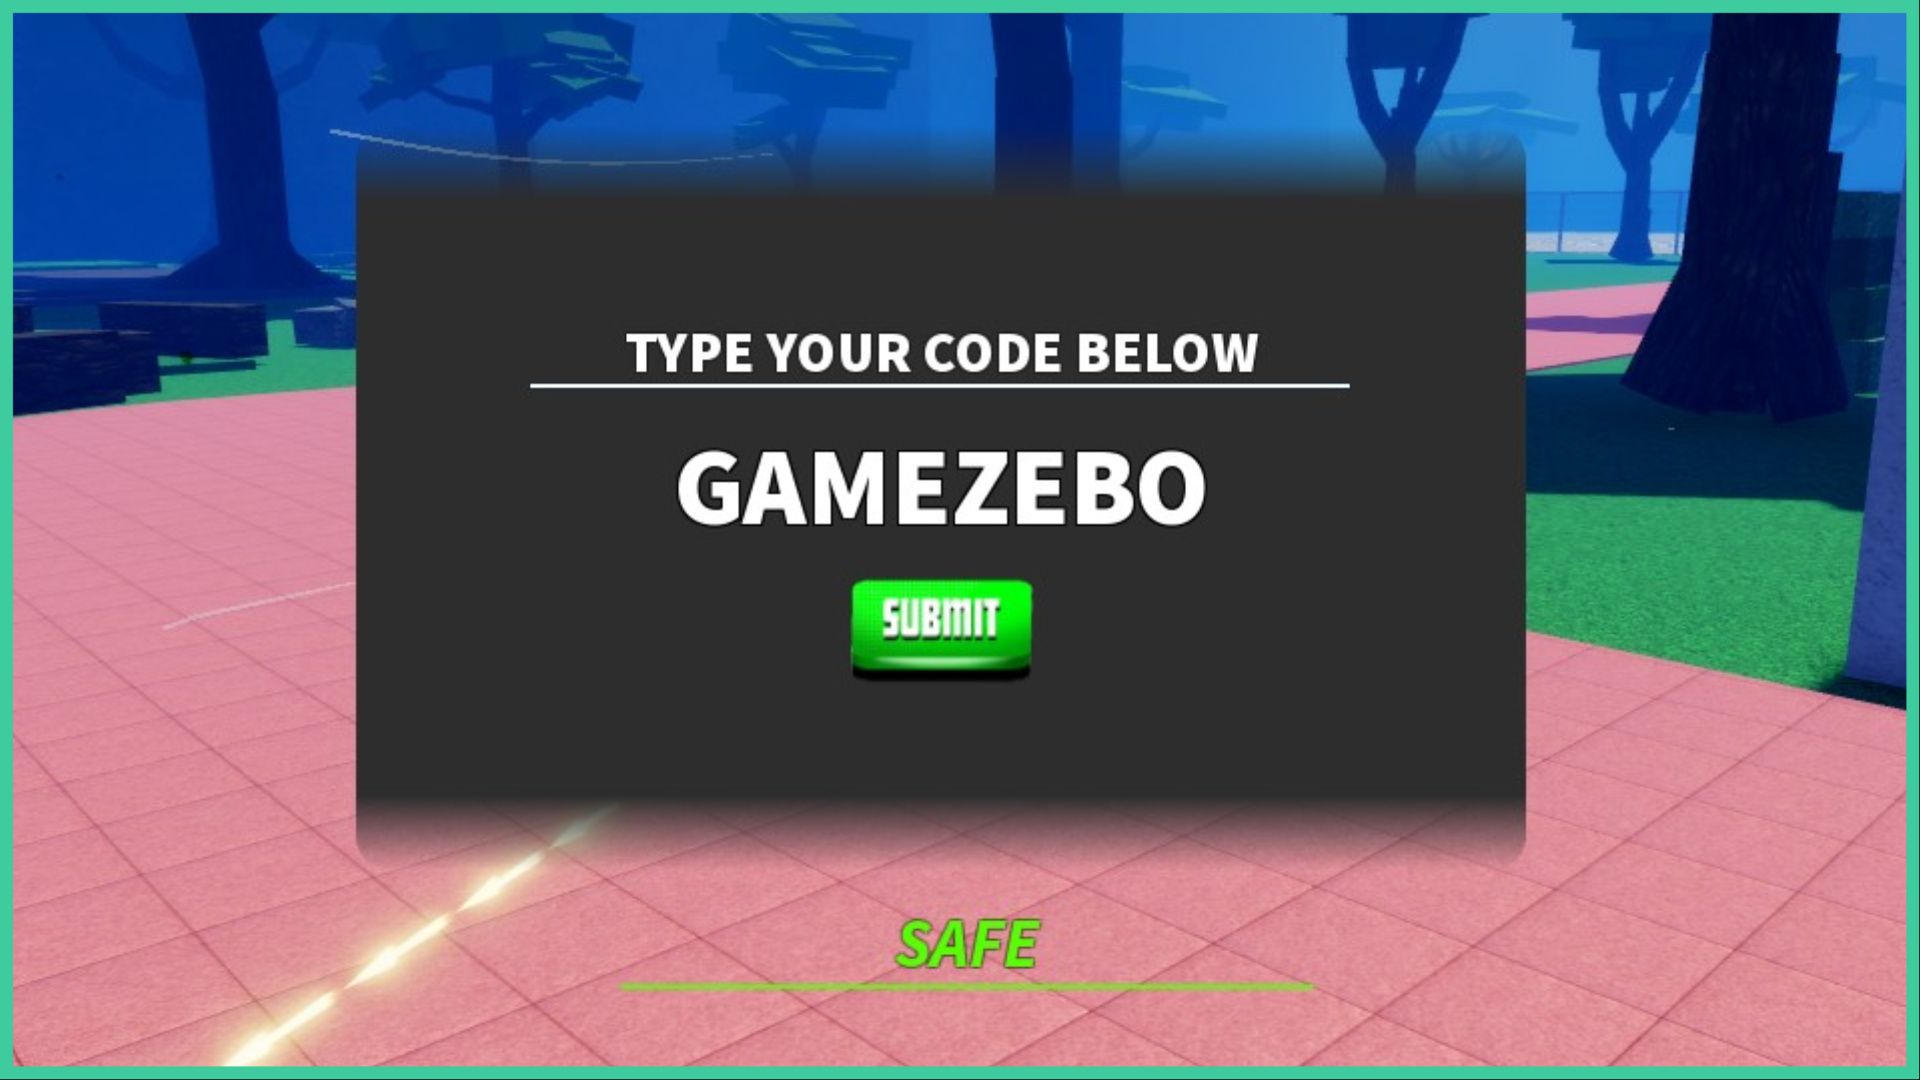 screenshot of the code redemption box for our anime quest codes guide, we've written GAMEZEBO into the text box, with a prompt above that reads 'type your code below', and there's a green submit button underneath, the text box, the background behind the box is of a park with trees and a fence that leads to a sandy area